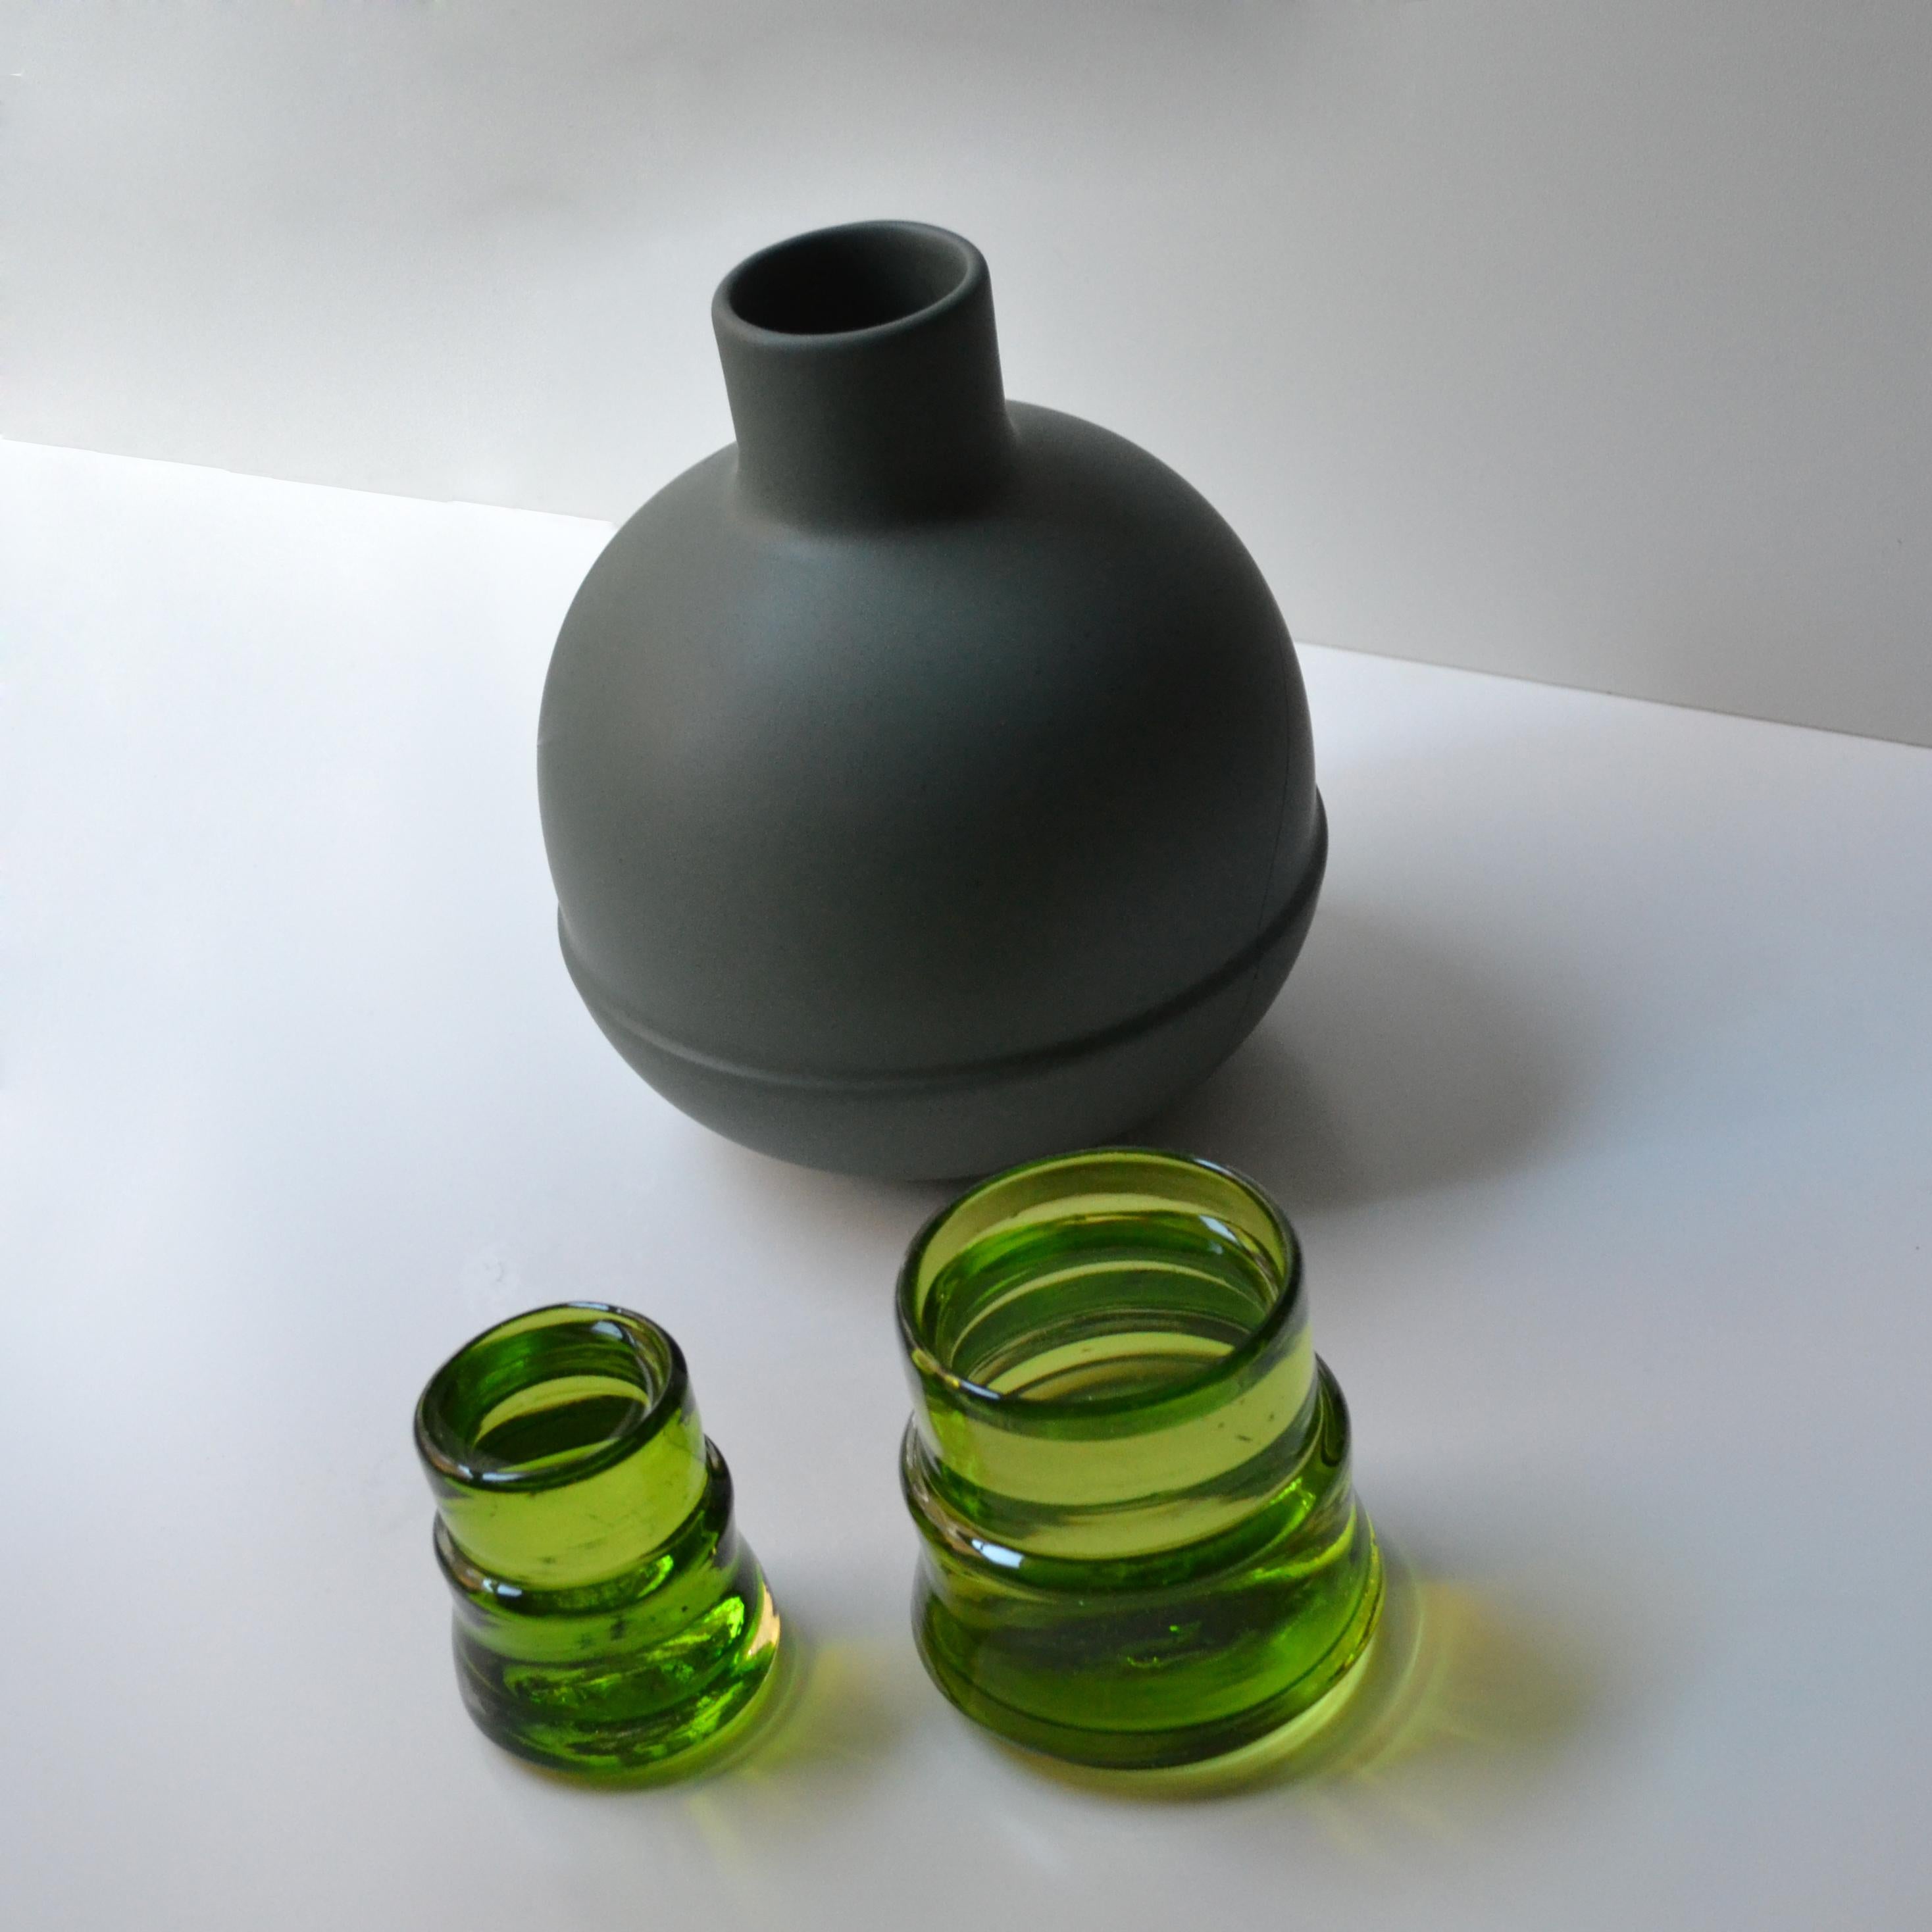 Our carafe colection is a tribute to the traditional pitchers of the regions of Tonala´ and Tlaquepaque in Jalisco, these two regions developed during the period of the conquest as pottery centers.
Originally these bottles were used to store water